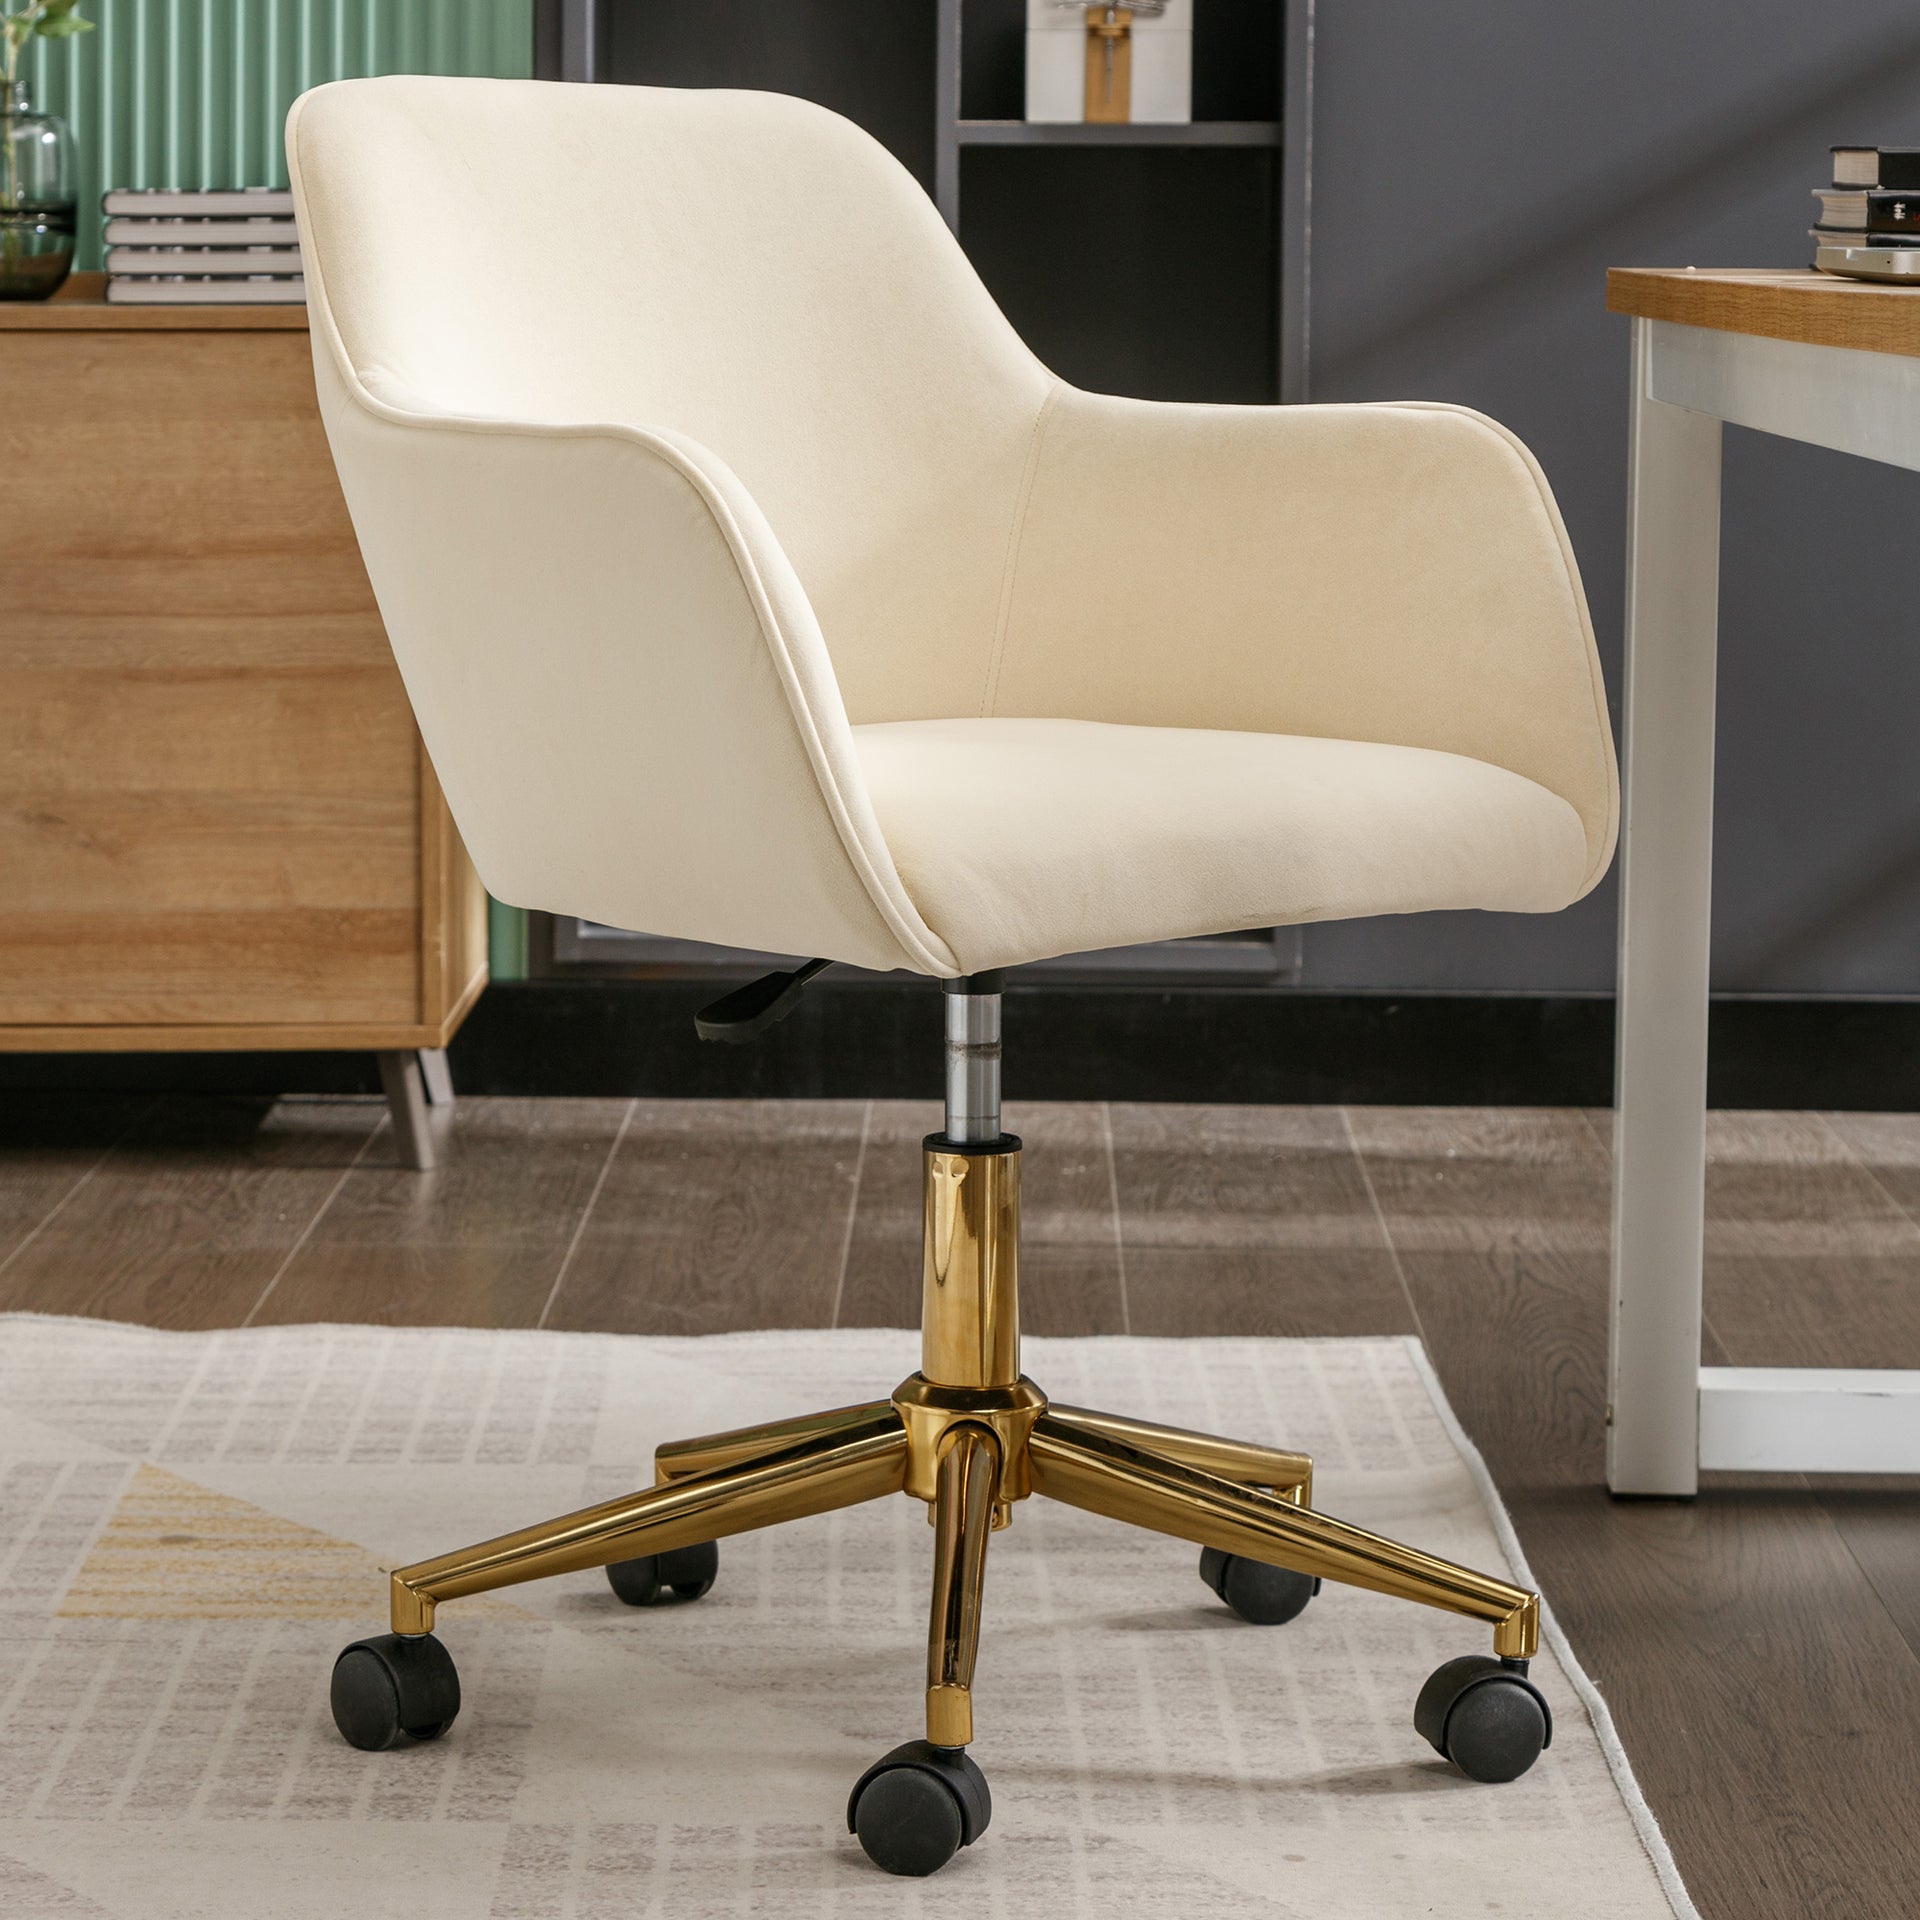 Modern Velvet Fabric Material Adjustable Height 360 revolving Home Office Chair with Gold Metal Legs and Universal Wheels for Indoor